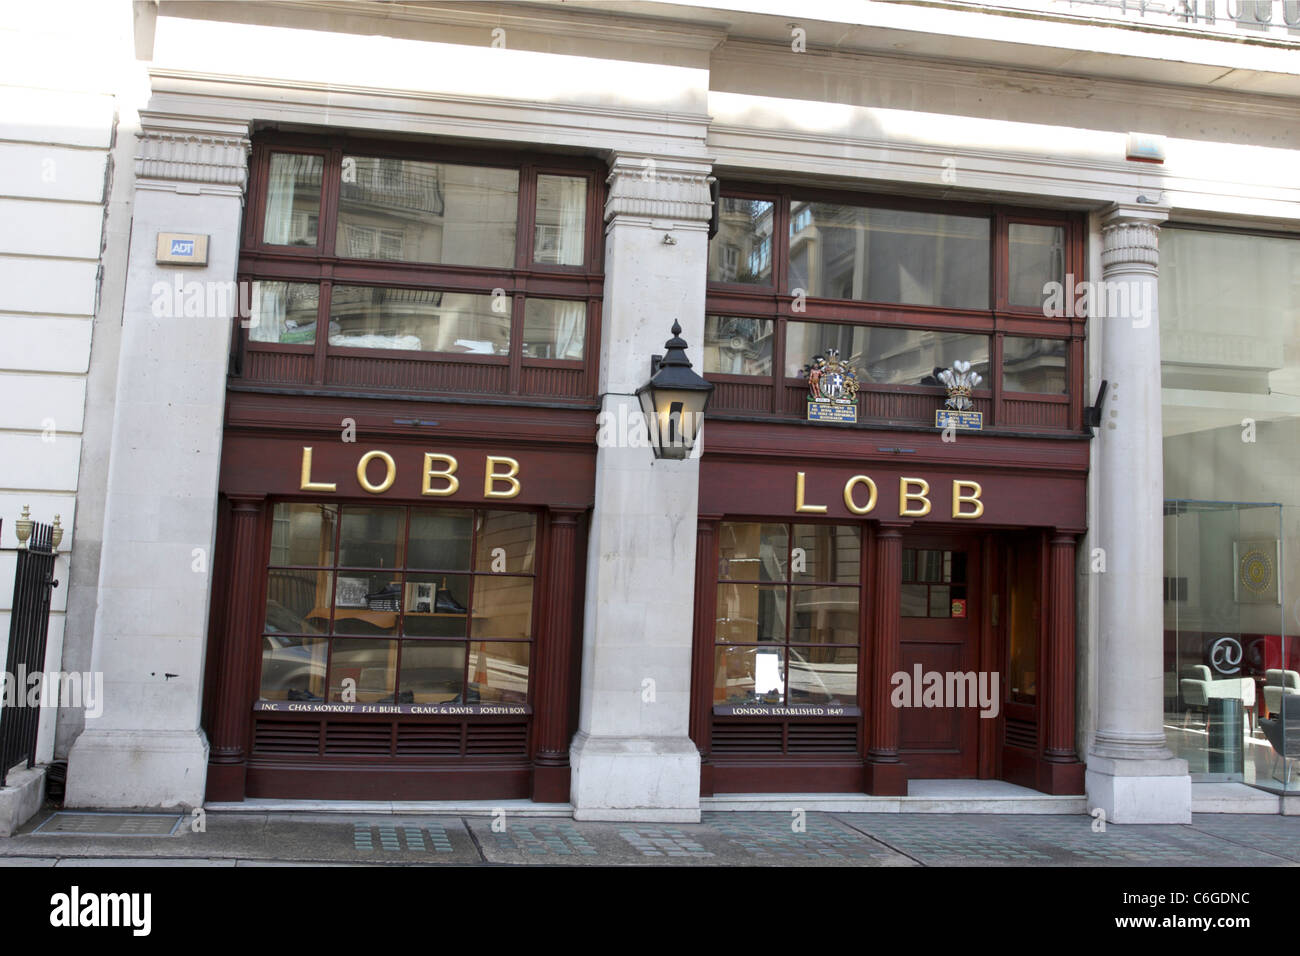 LOBB, high end boot-makers and shoemakers for both ladies and gentlemen, situated inSt James Street,London. Stock Photo